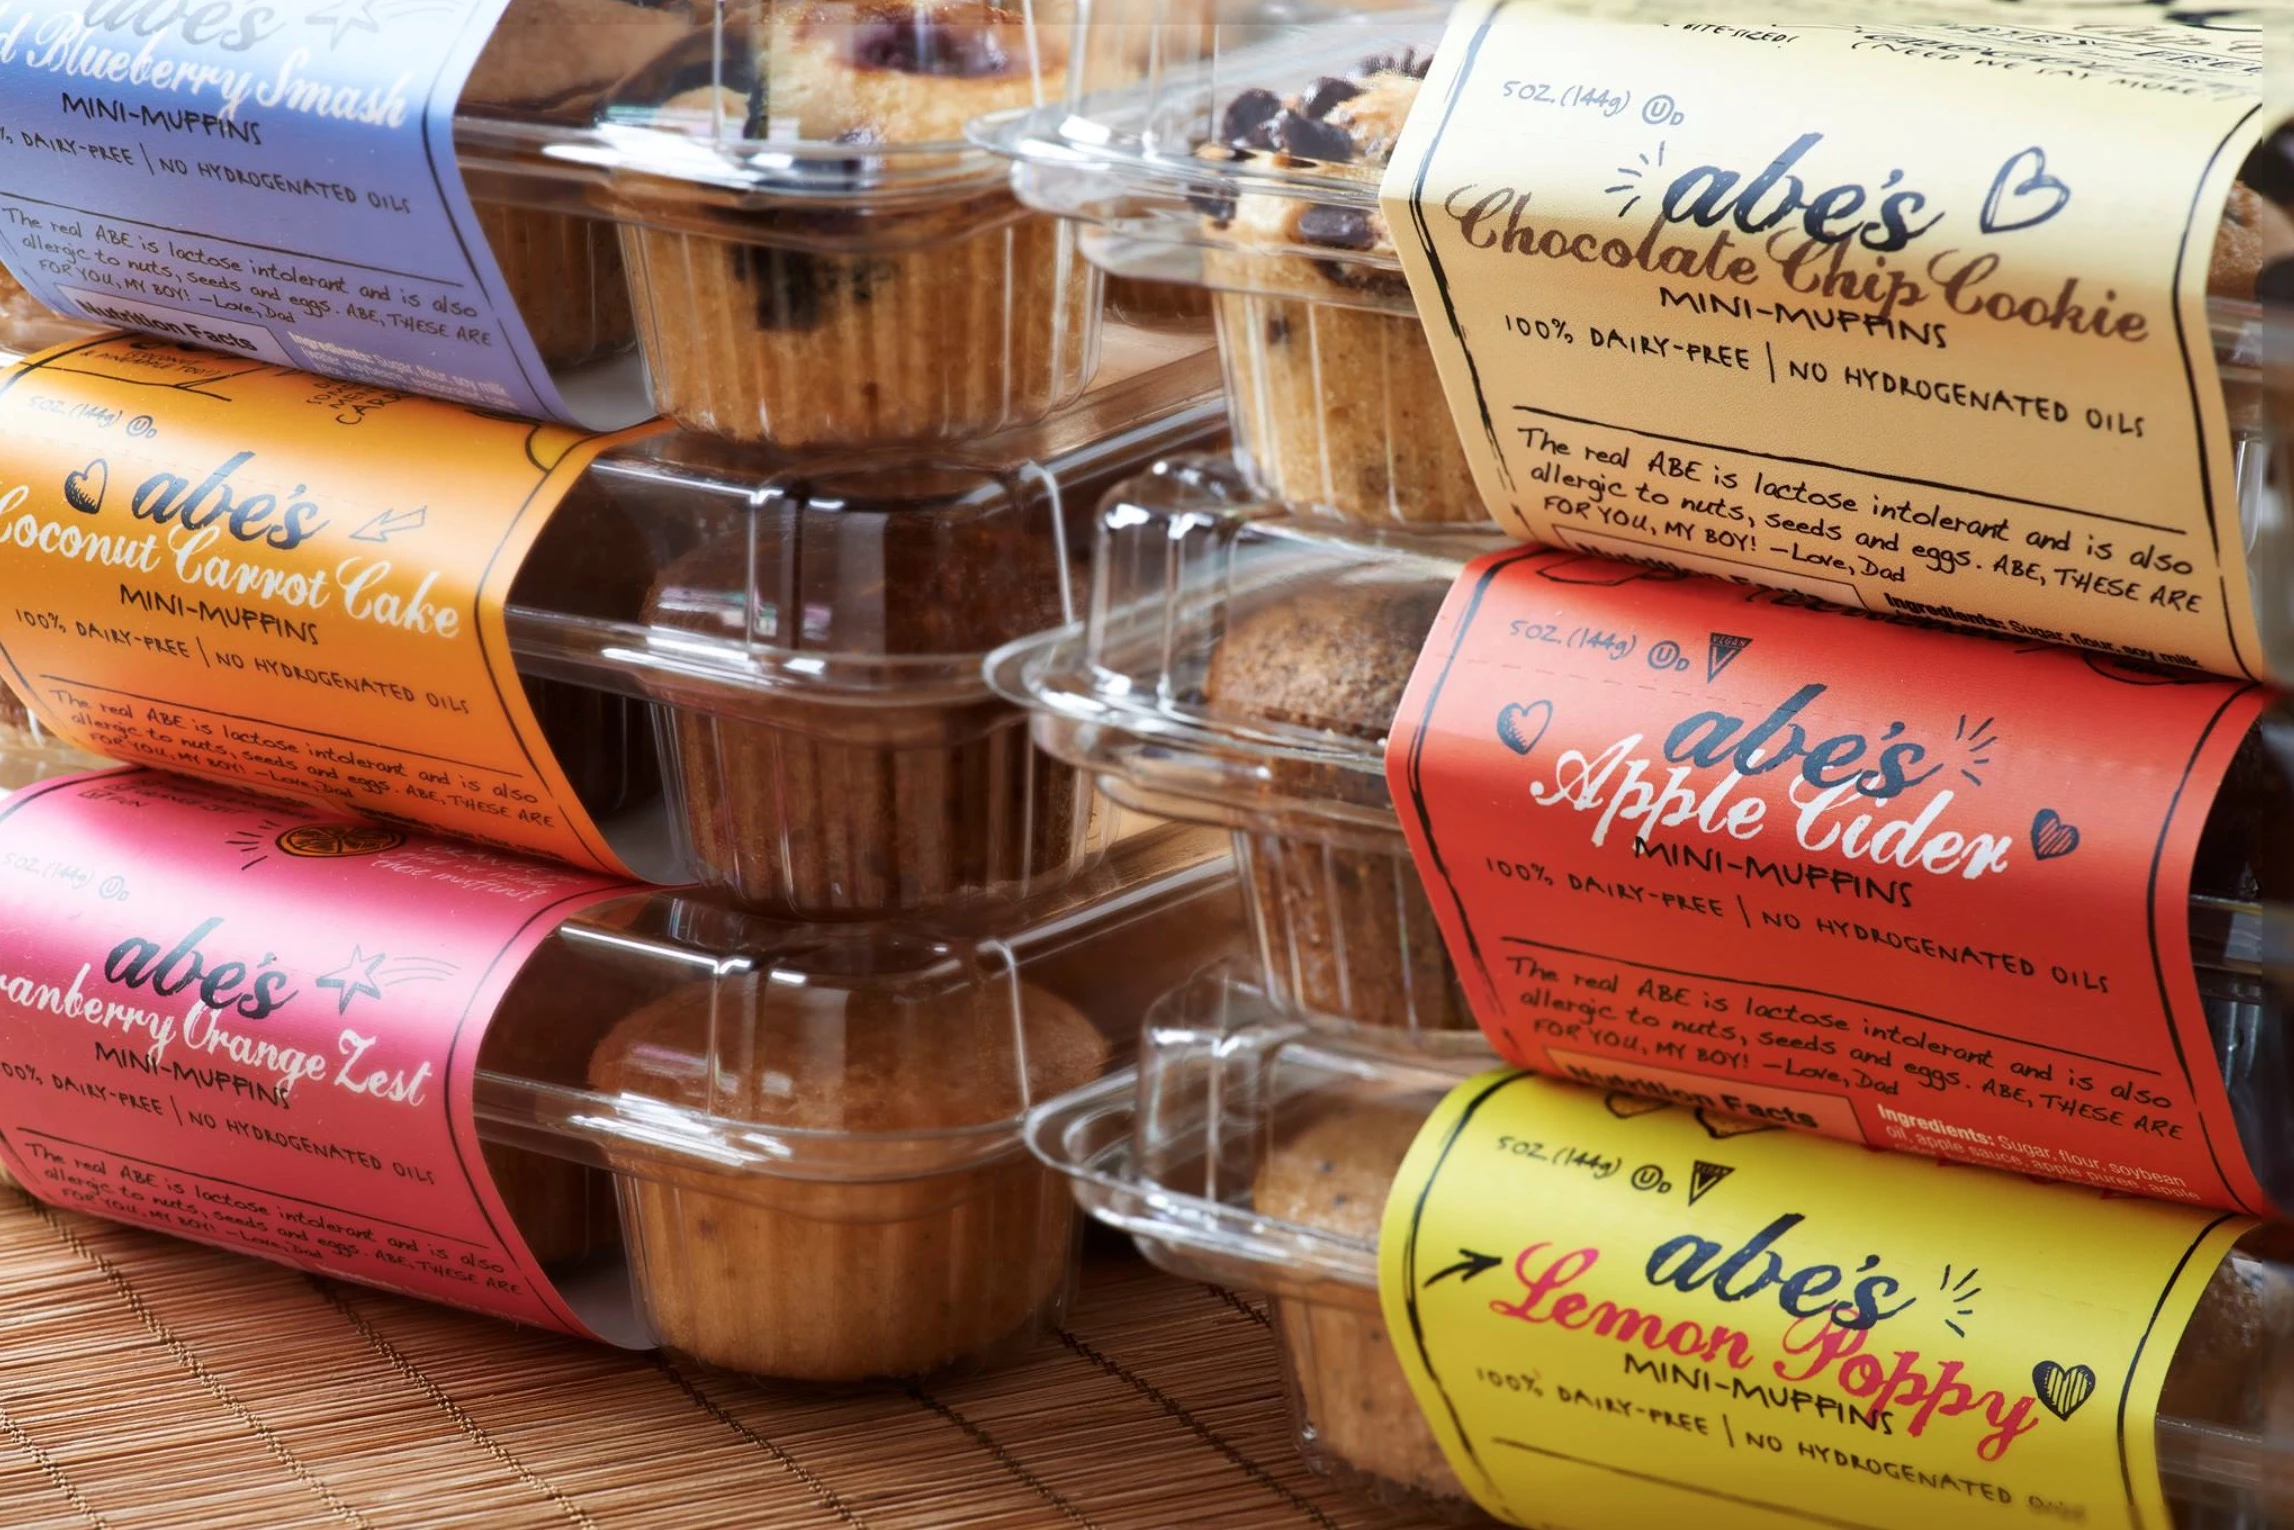 Store Bought Store Bought Muffins Dairy-Free, Nut-Free & Egg-Free by Abe's